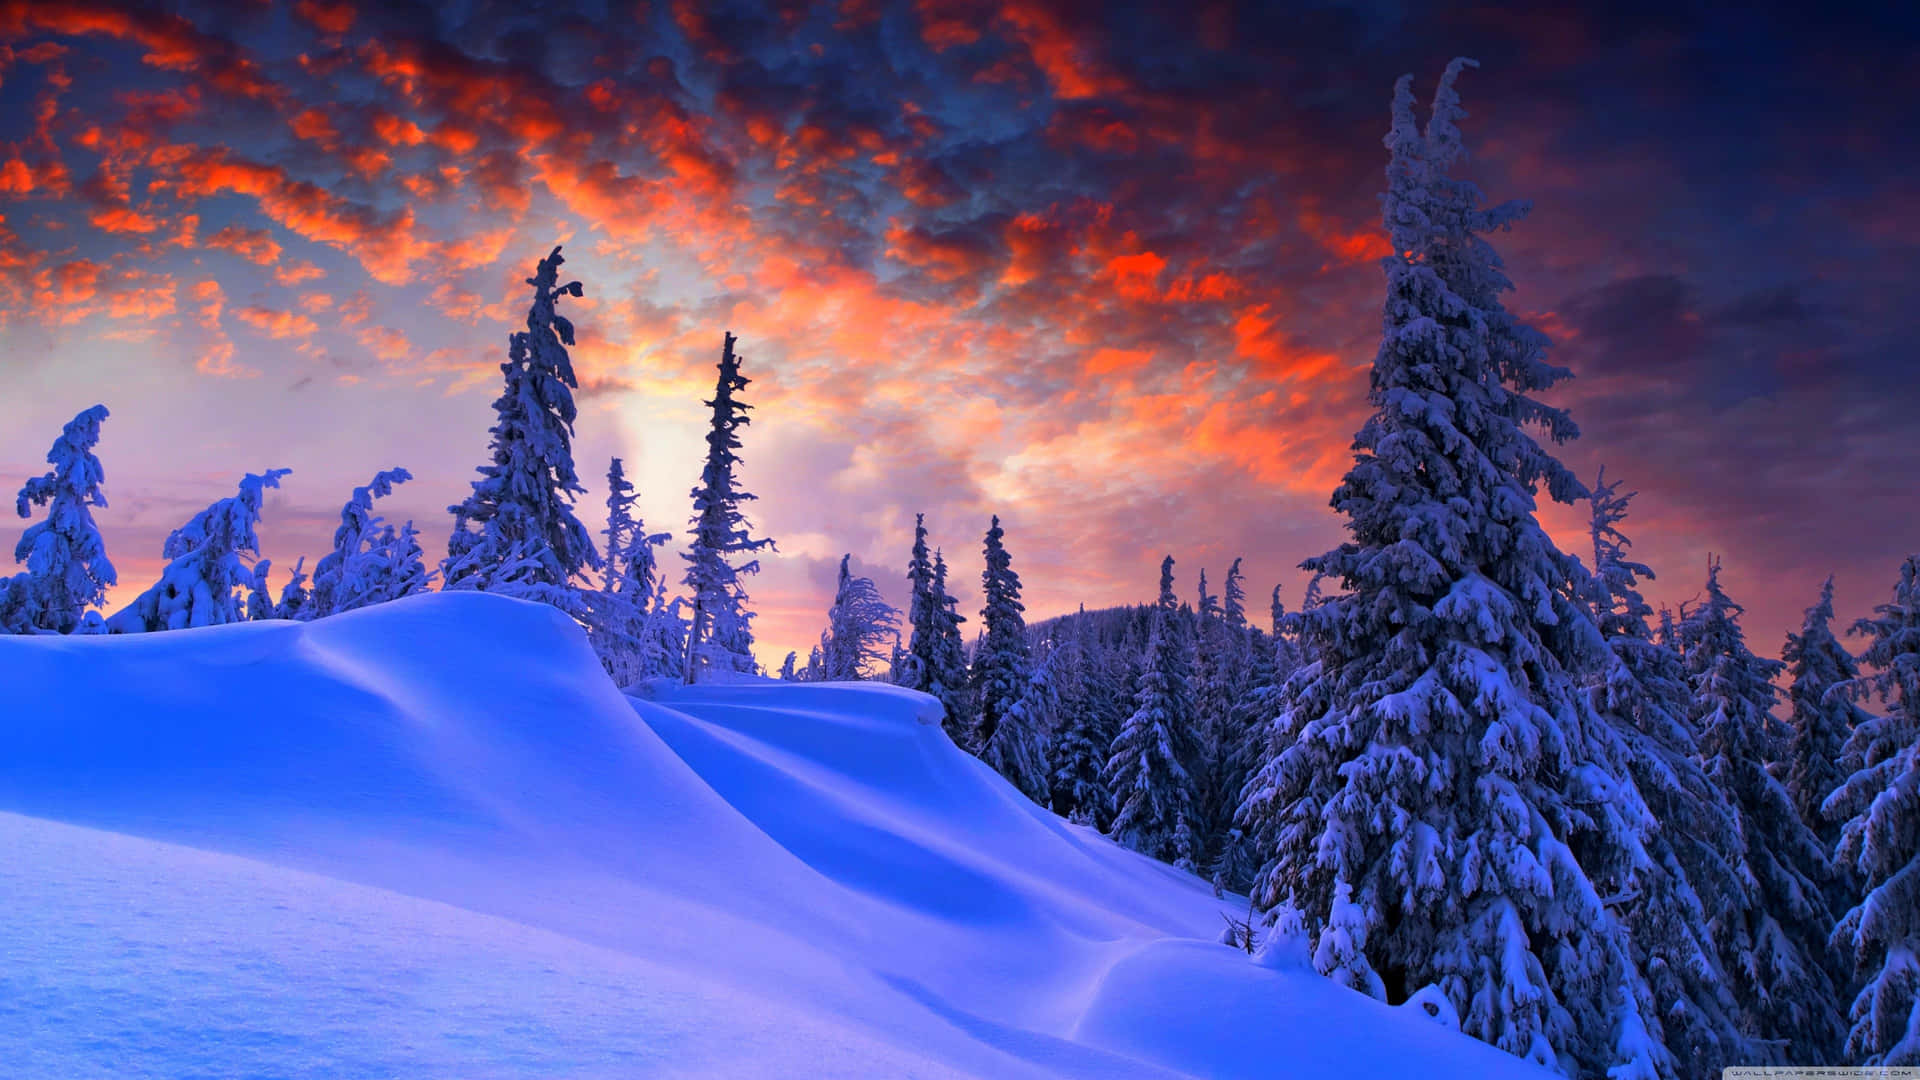 "Stay warm and cherishing the beauty of winter" Wallpaper